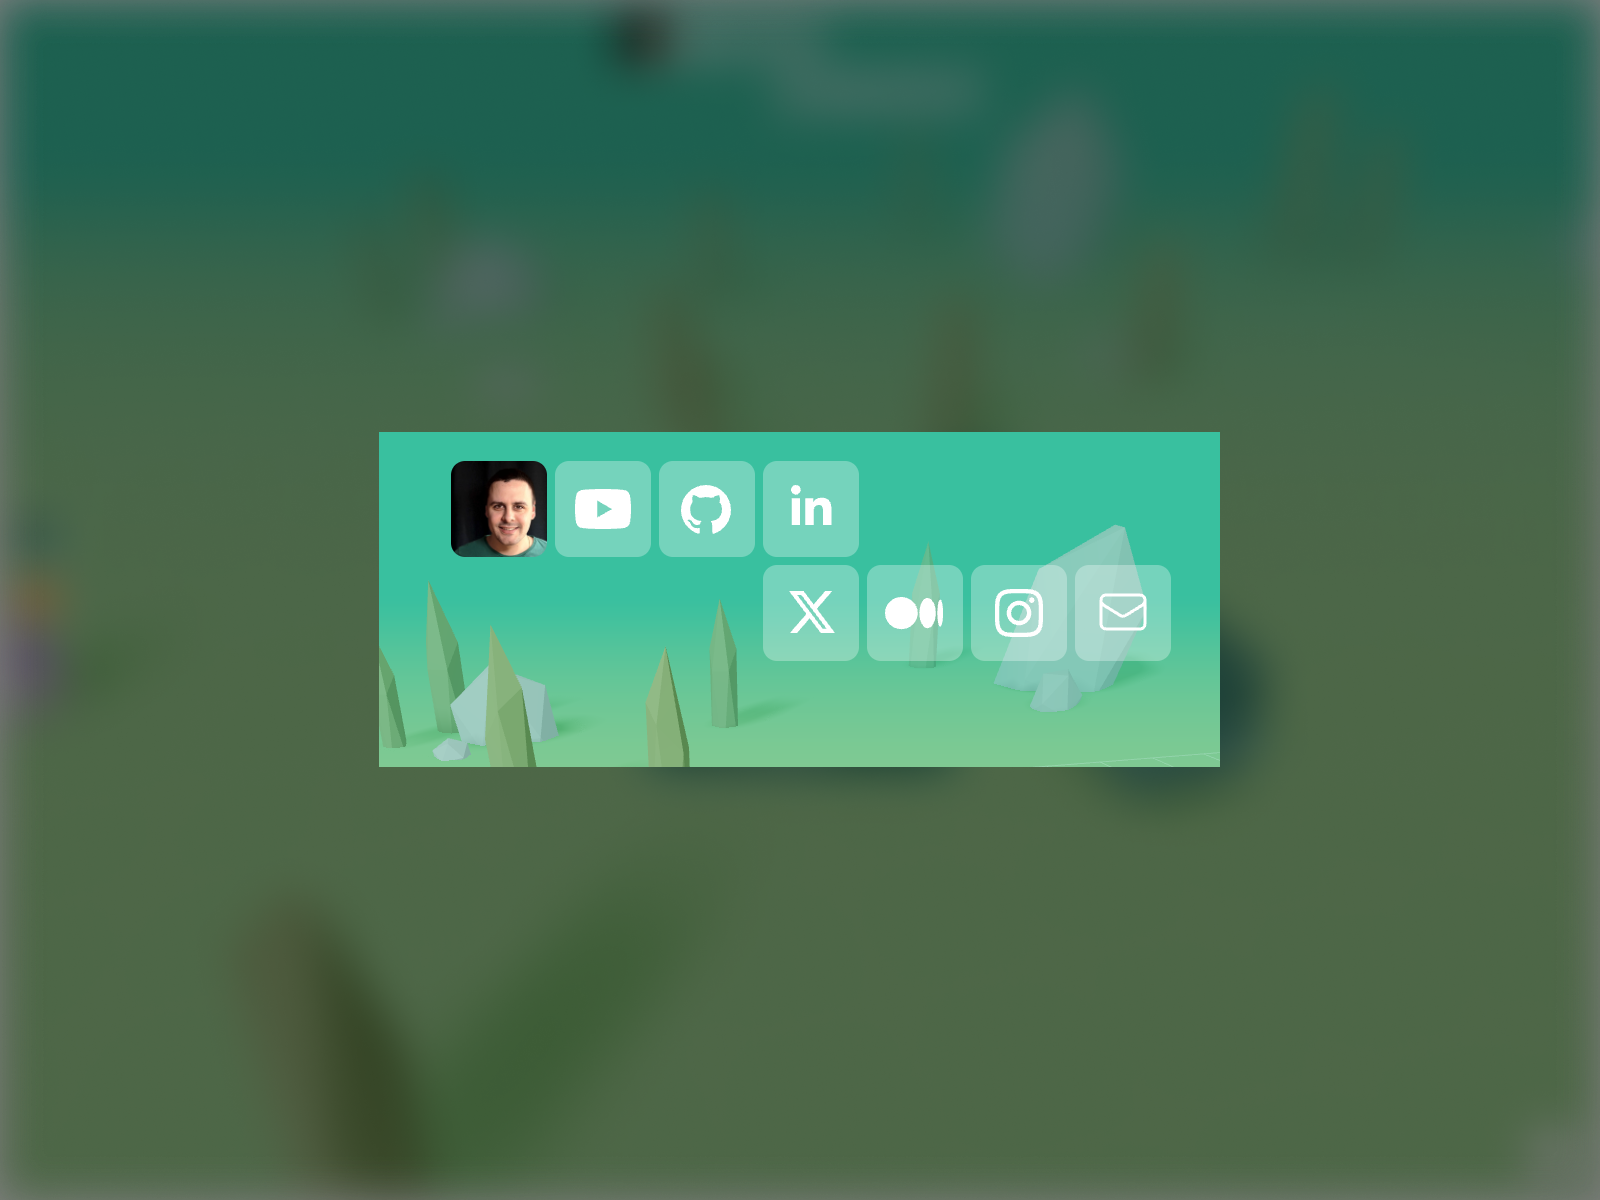 A header with icons of socials and email